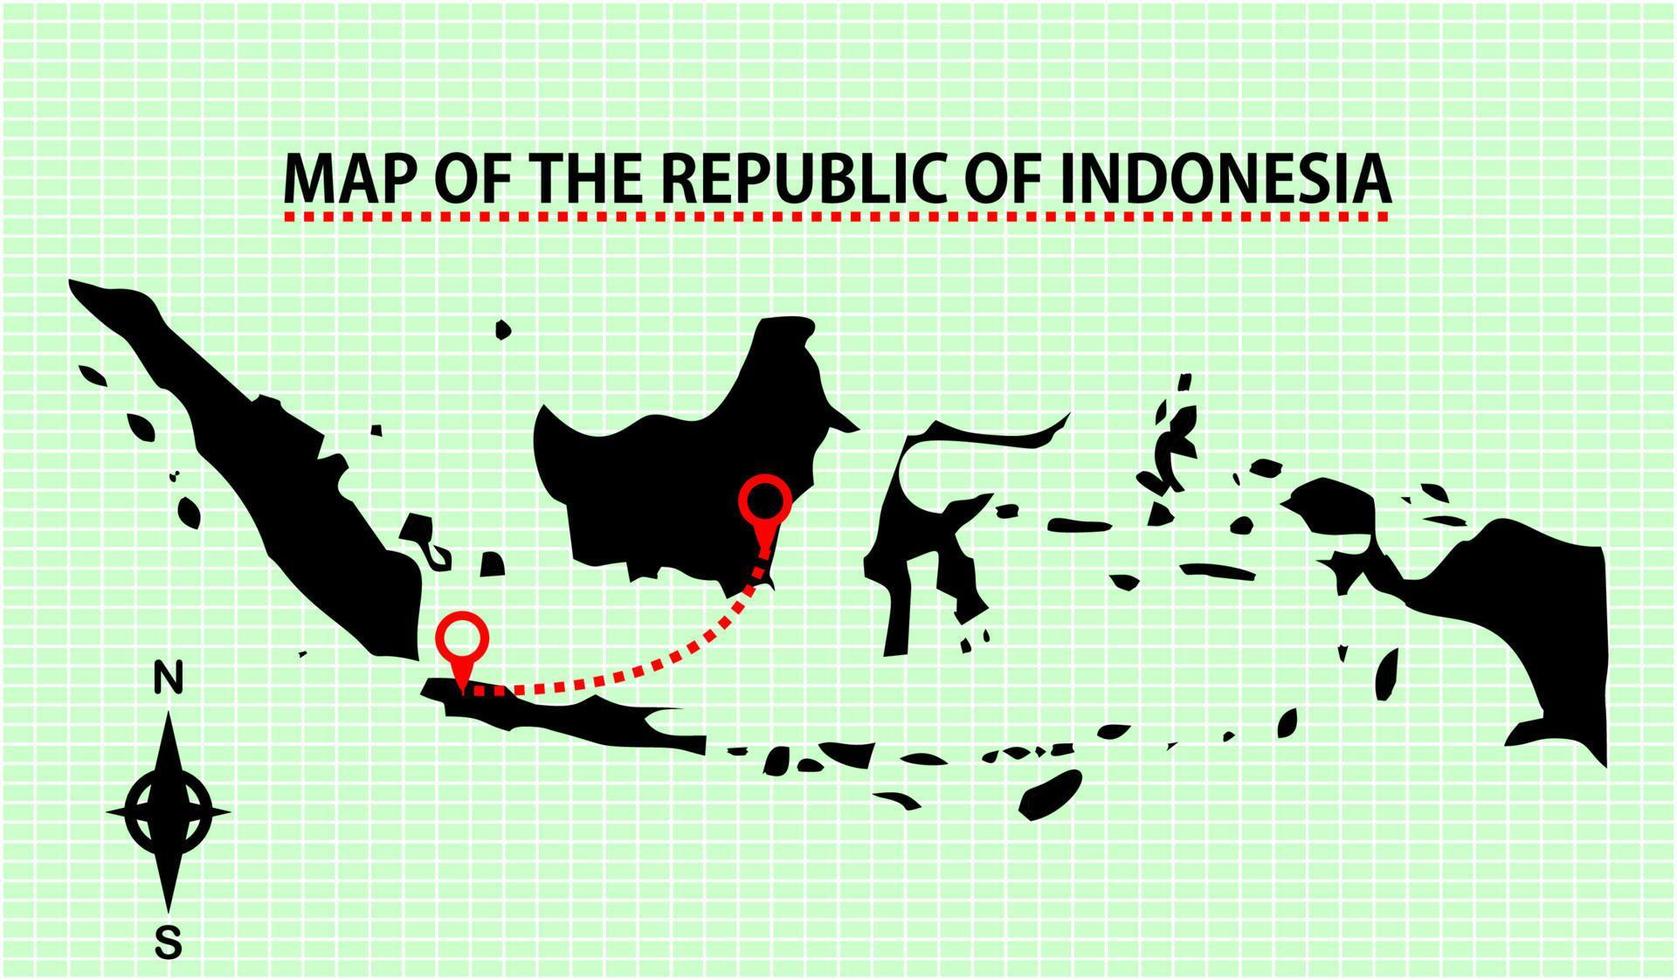 VECTOR MAP OF INDONESIA WITH GRID BACKGROUND. ACCOMPANYED WITH DIAGRAM GRAPHICS